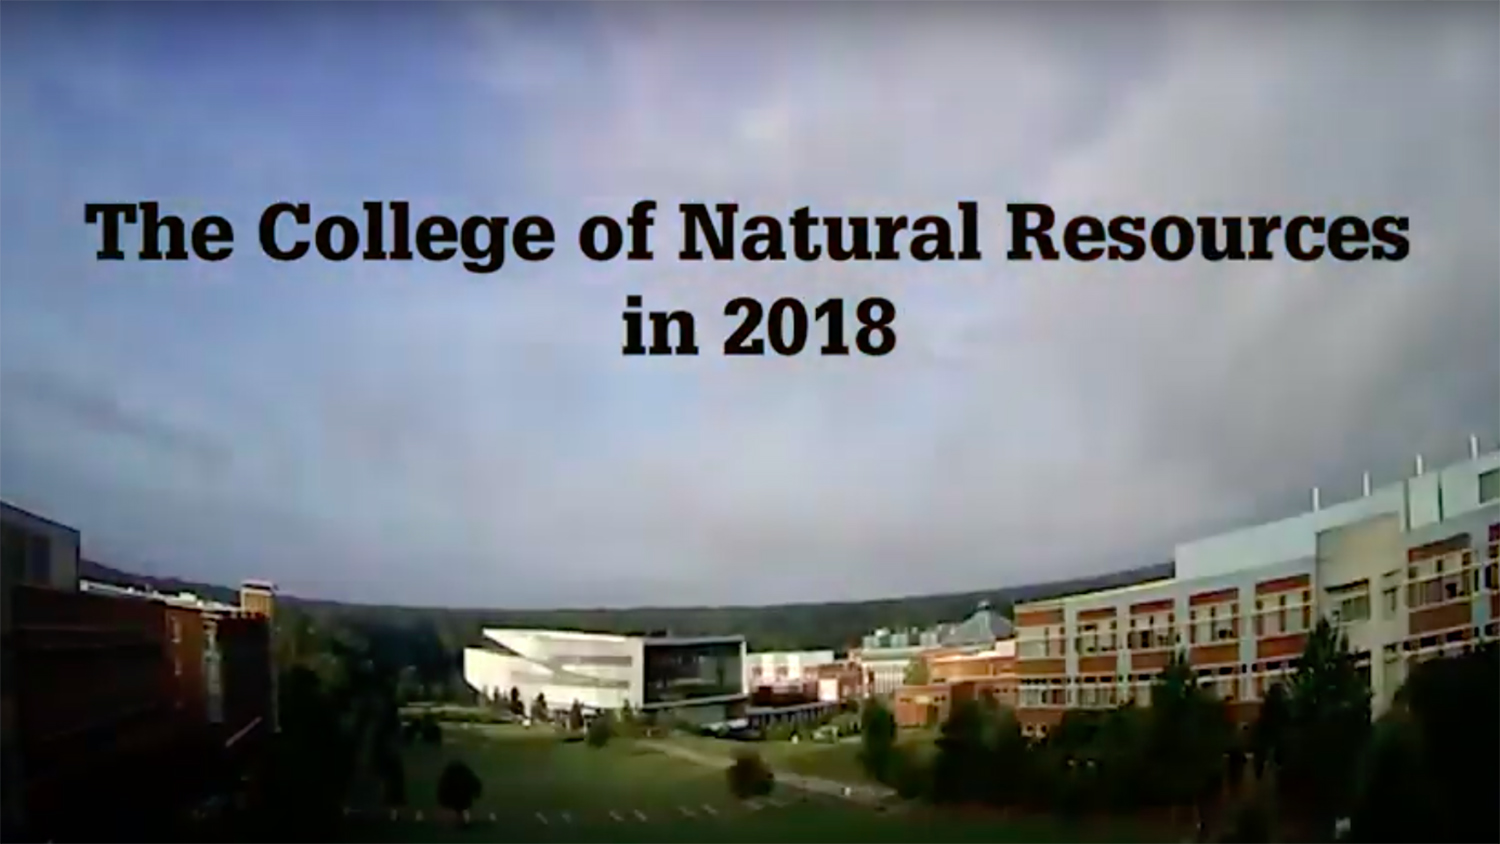 The College of Natural Resources in 2018